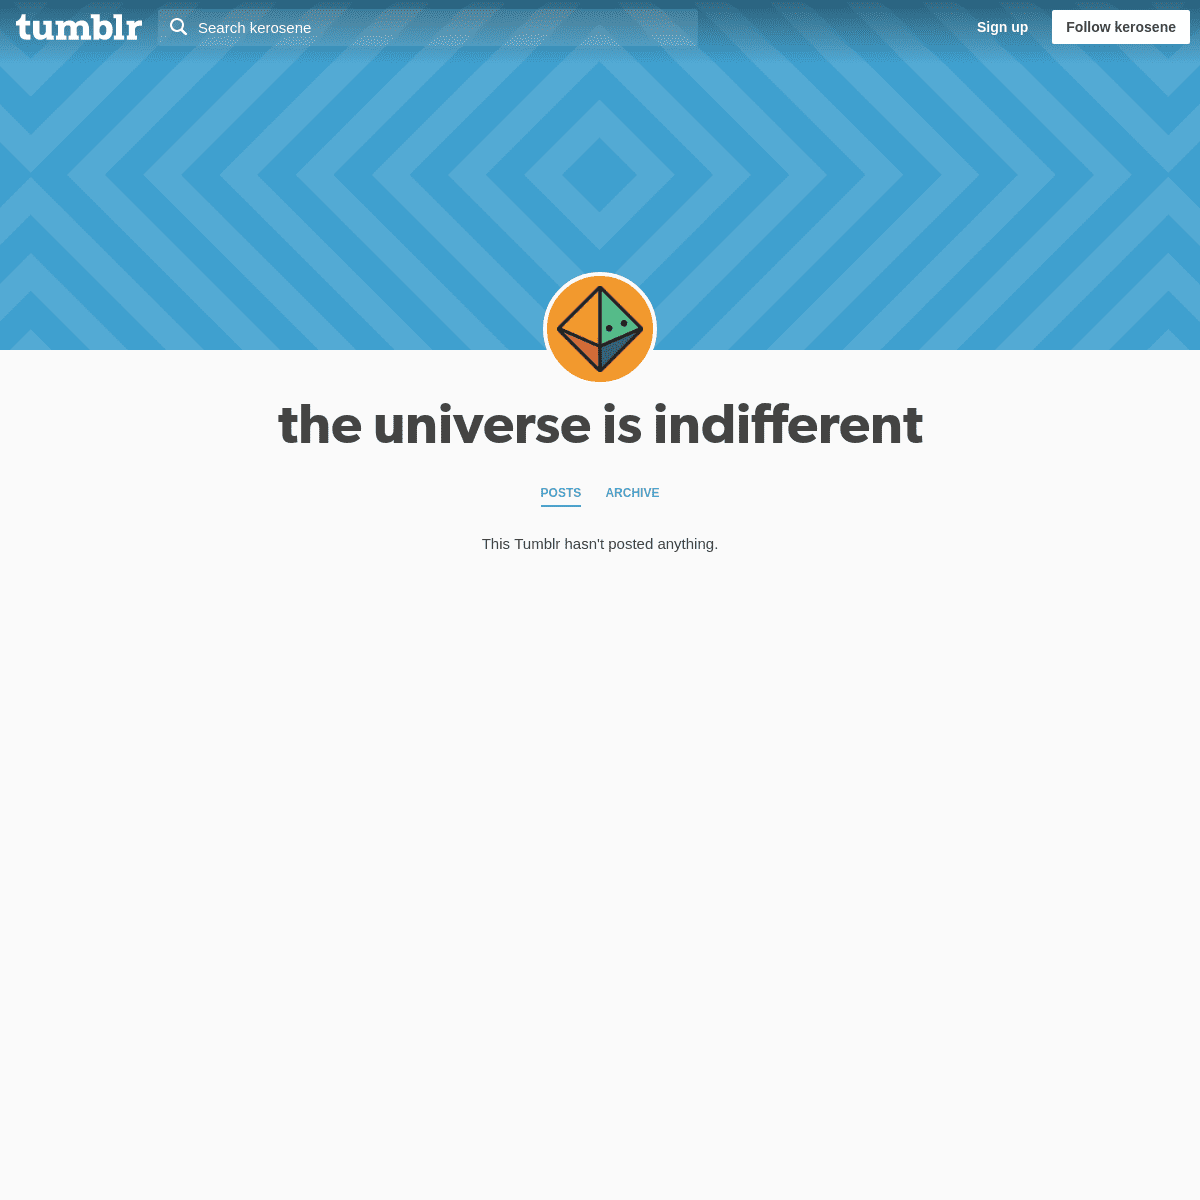 the universe is indifferent